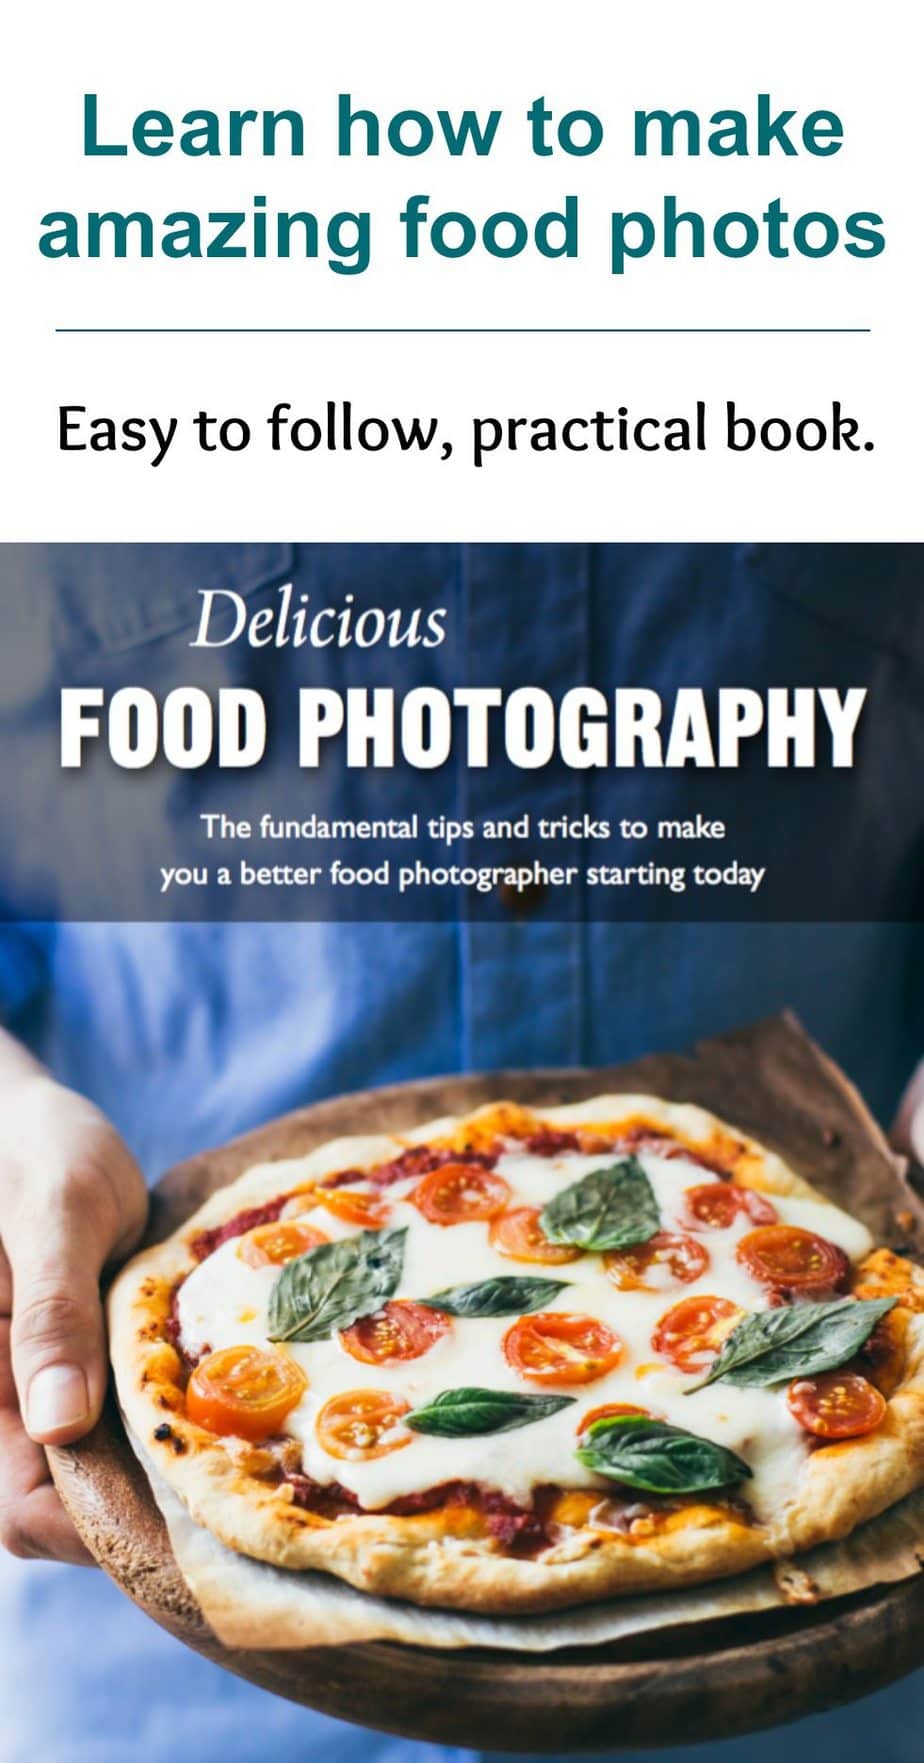 Delicious Food Photography Ebook, learn how to make amazing food photos!